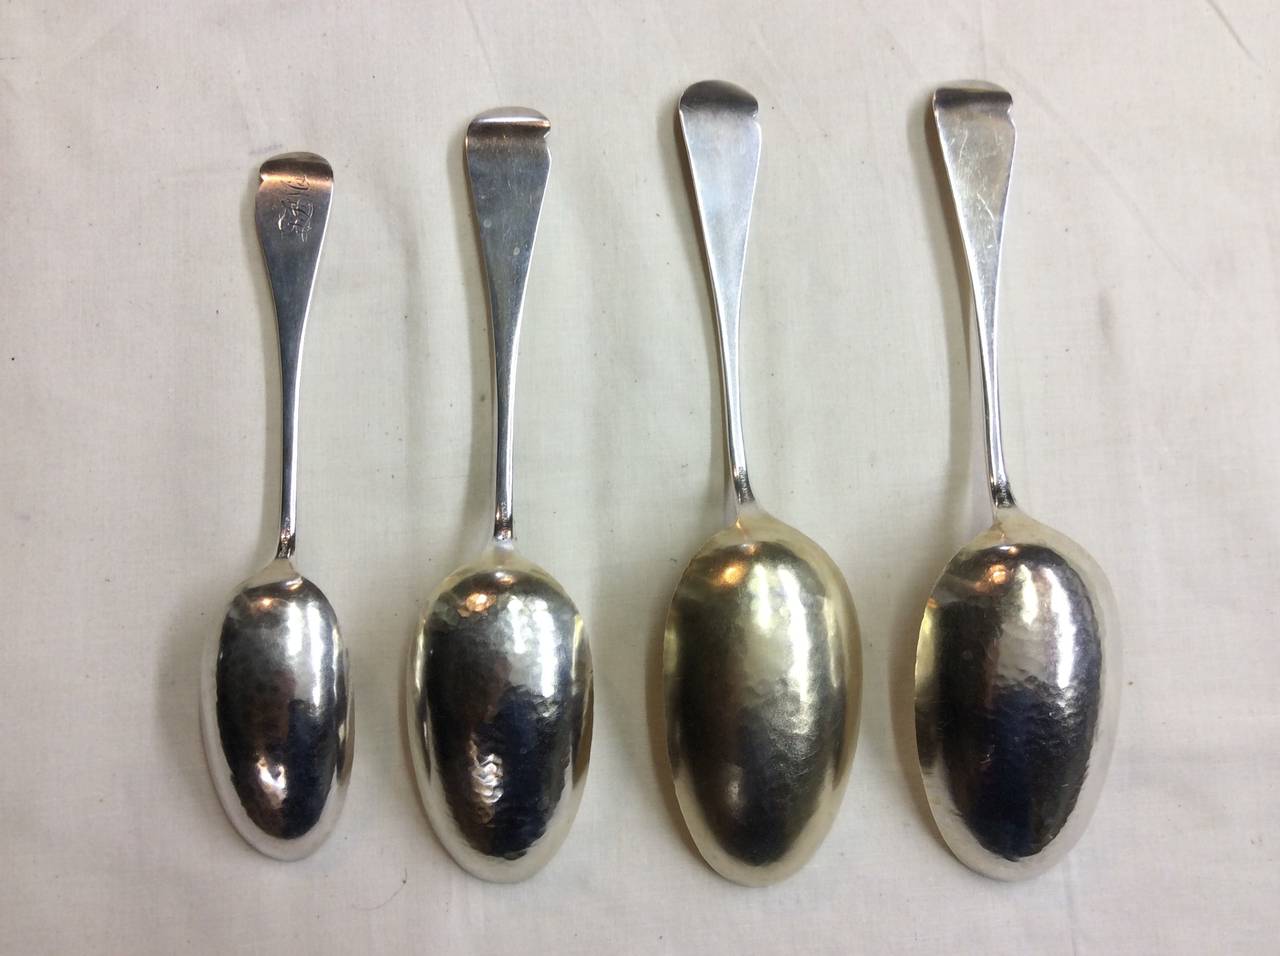 Wood and Hughes (Shiebler) Aesthetic Sterling Sliver Serving Spoons In Excellent Condition For Sale In New York, NY